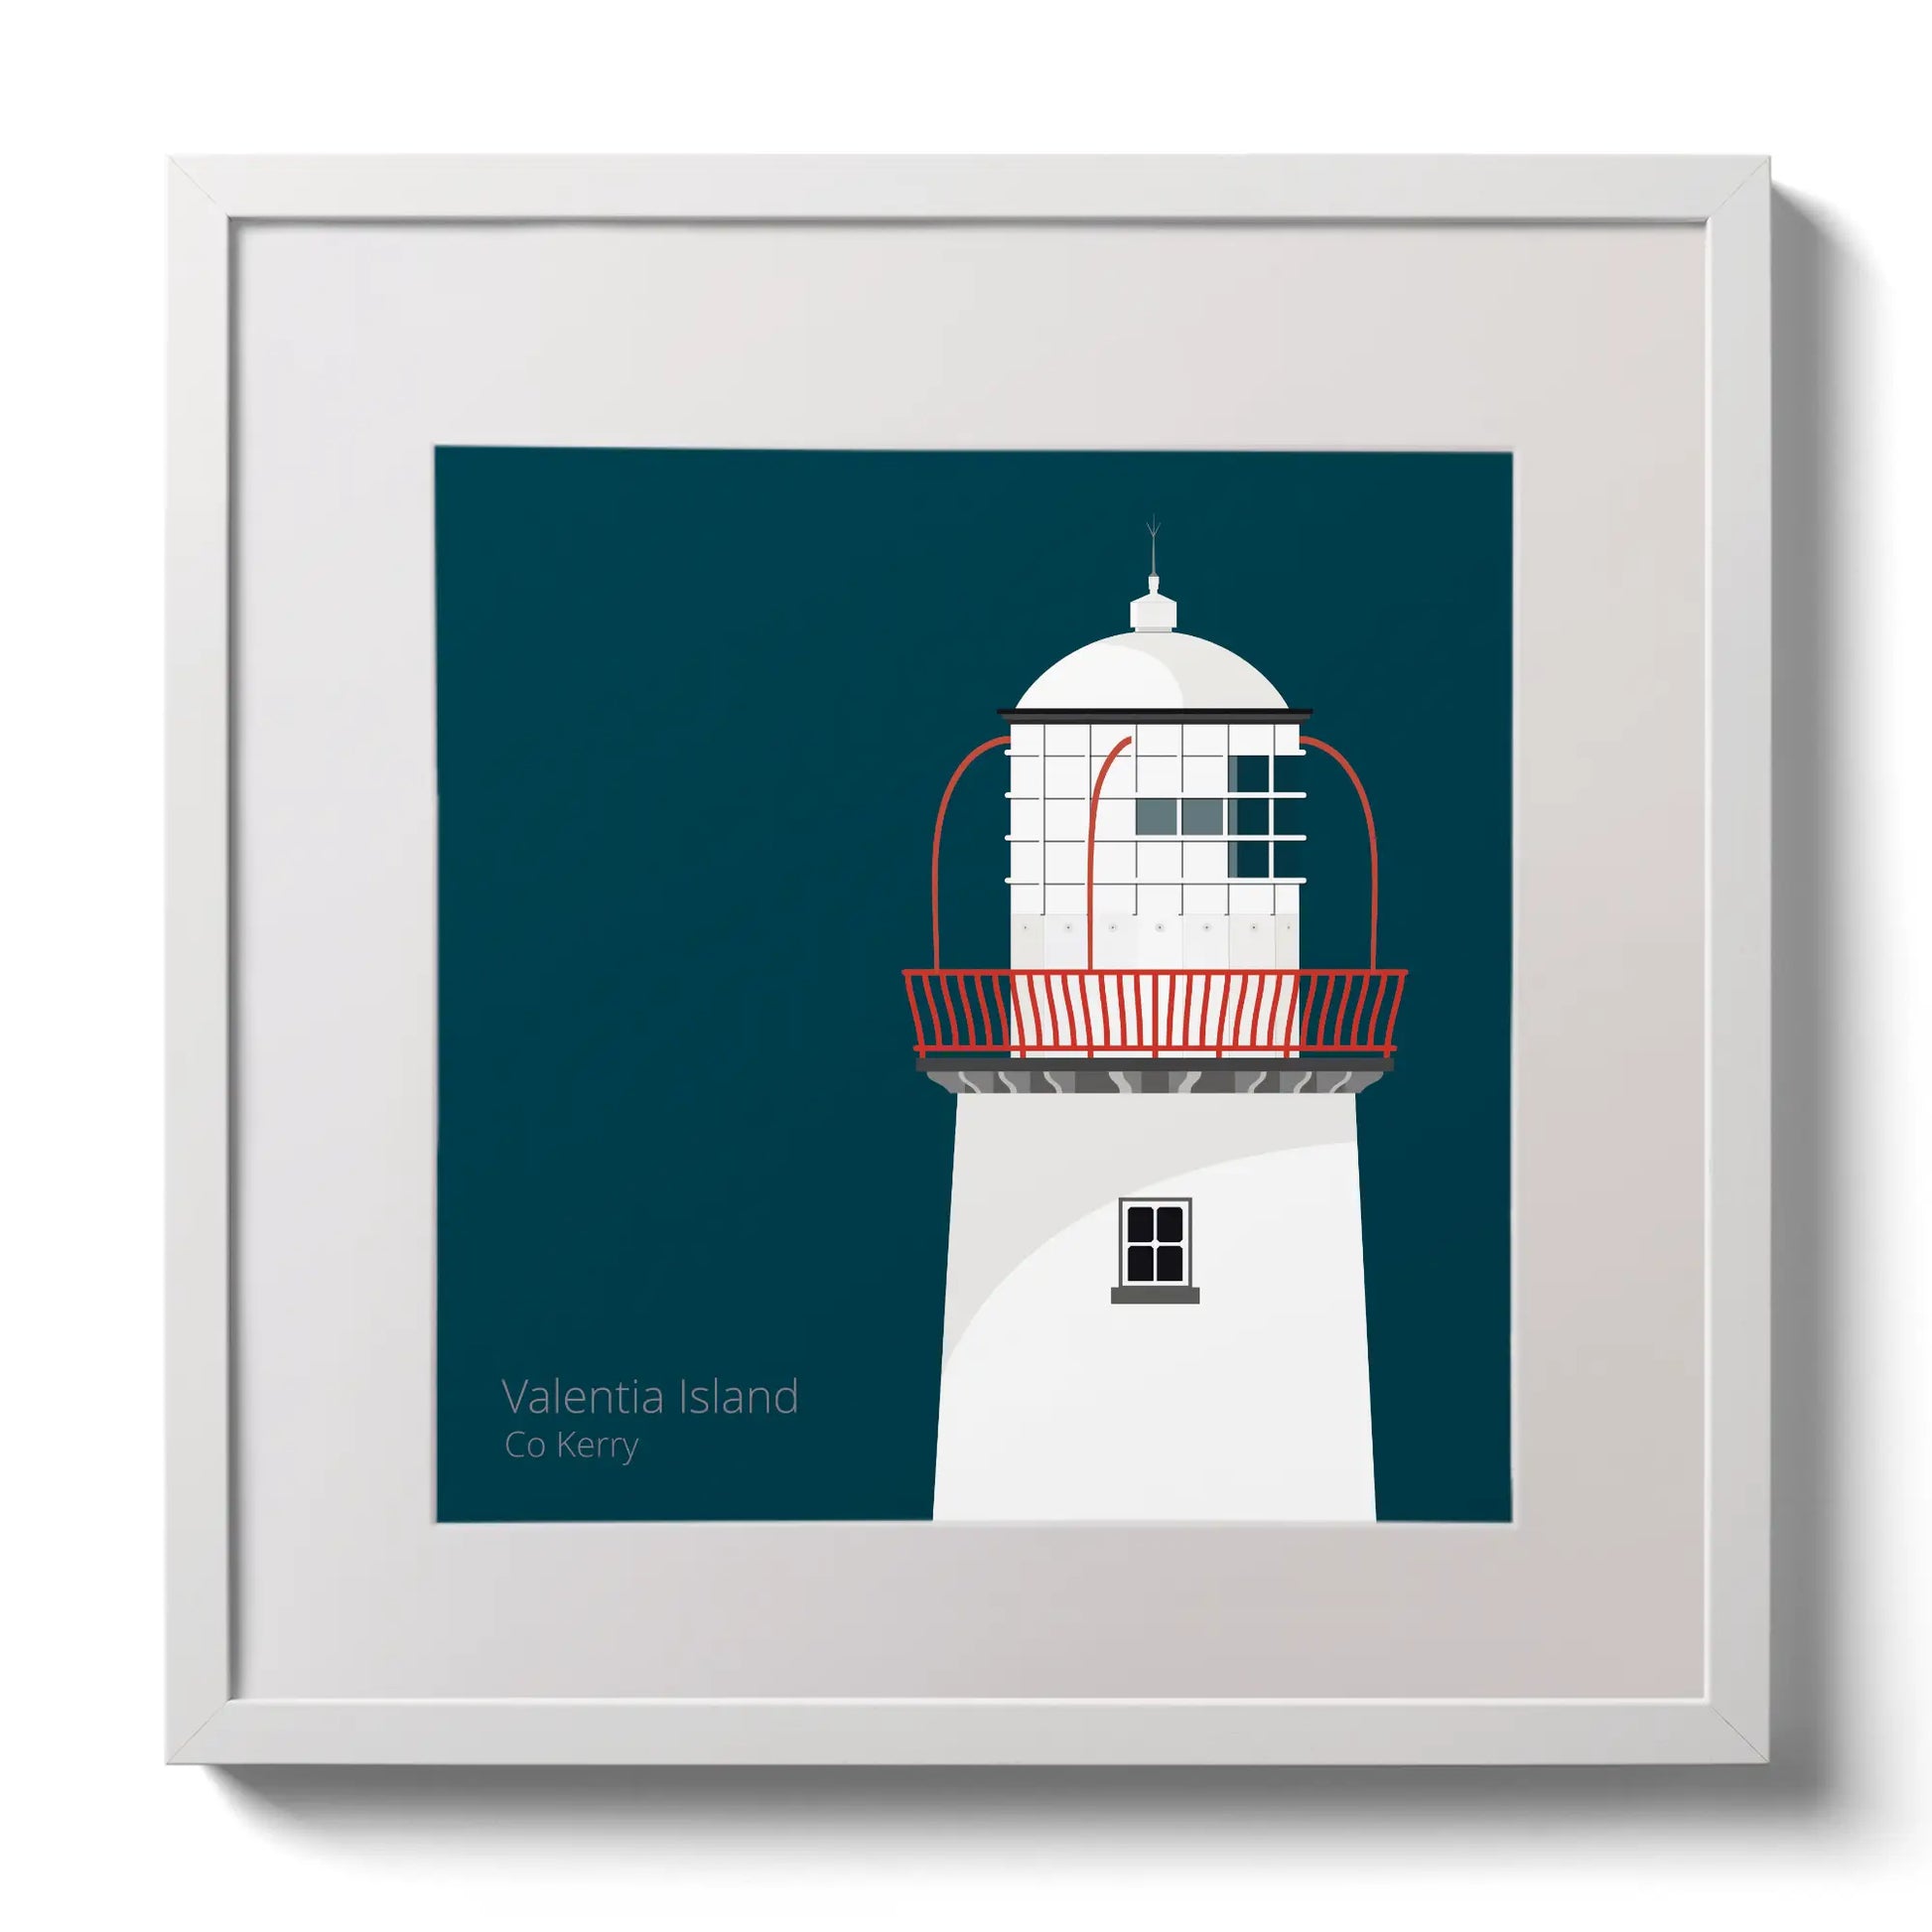 Illustration of Valentia Island lighthouse on a midnight blue background,  in a white square frame measuring 30x30cm.